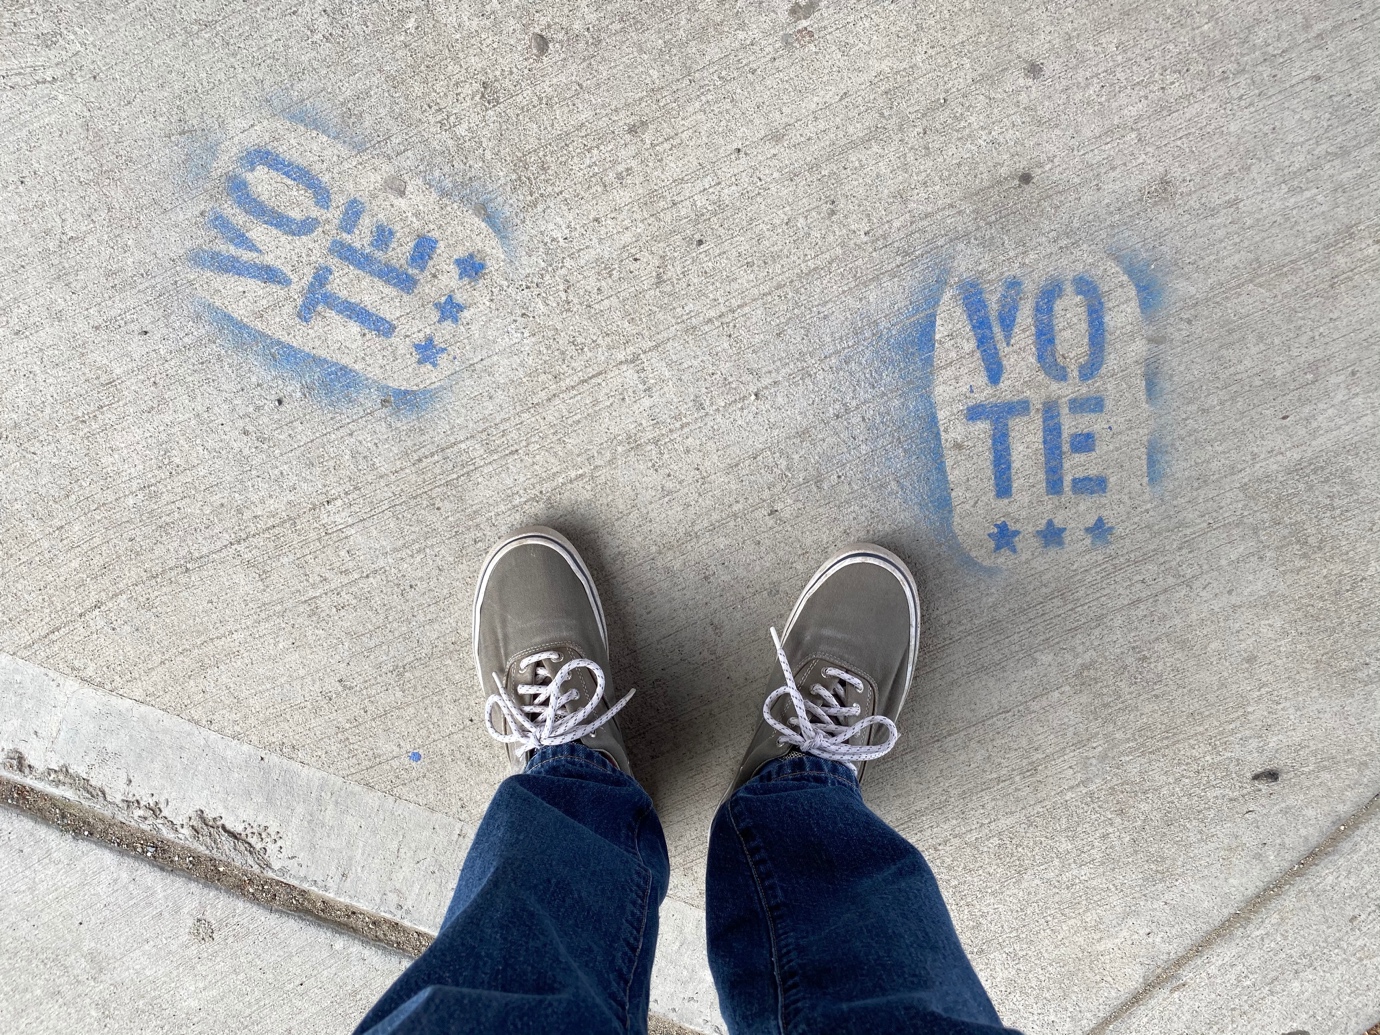 A person's feet and shoes on a sidewalk with blue painted footprints

Description automatically generated